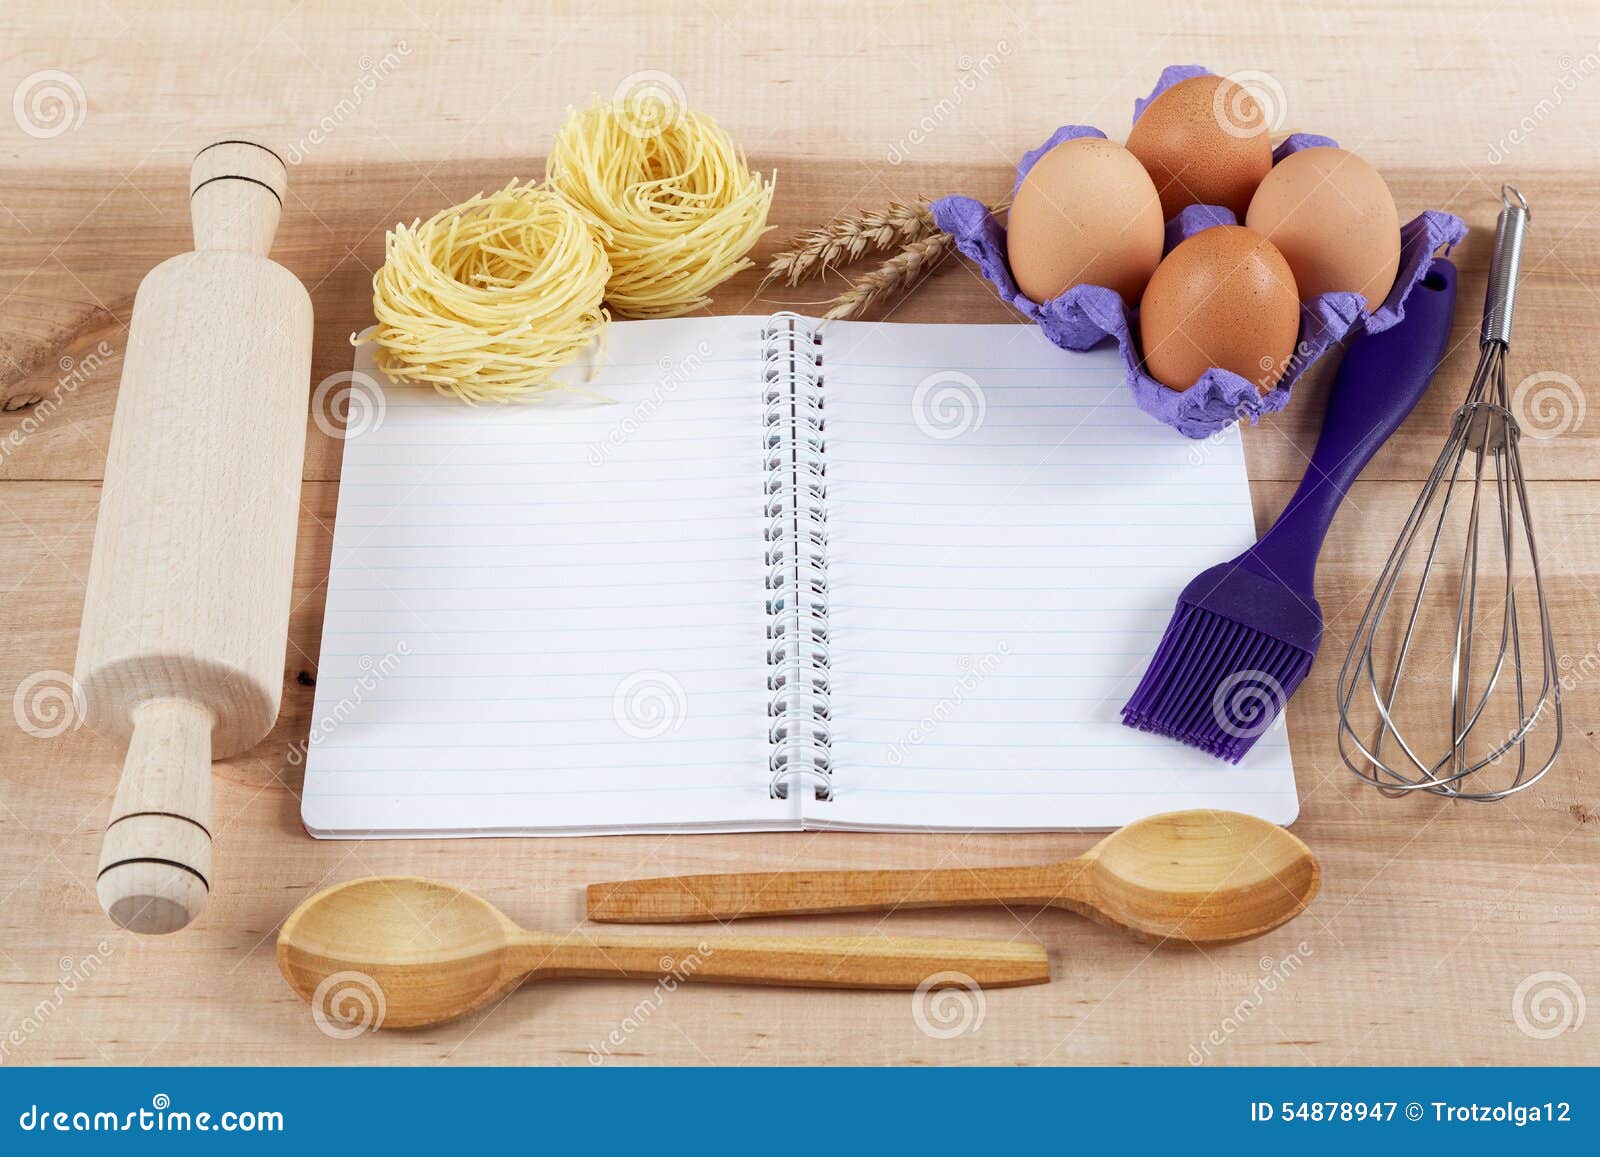 Baking Ingredients for Cooking and Notebook for Recipes. Stock Image ...